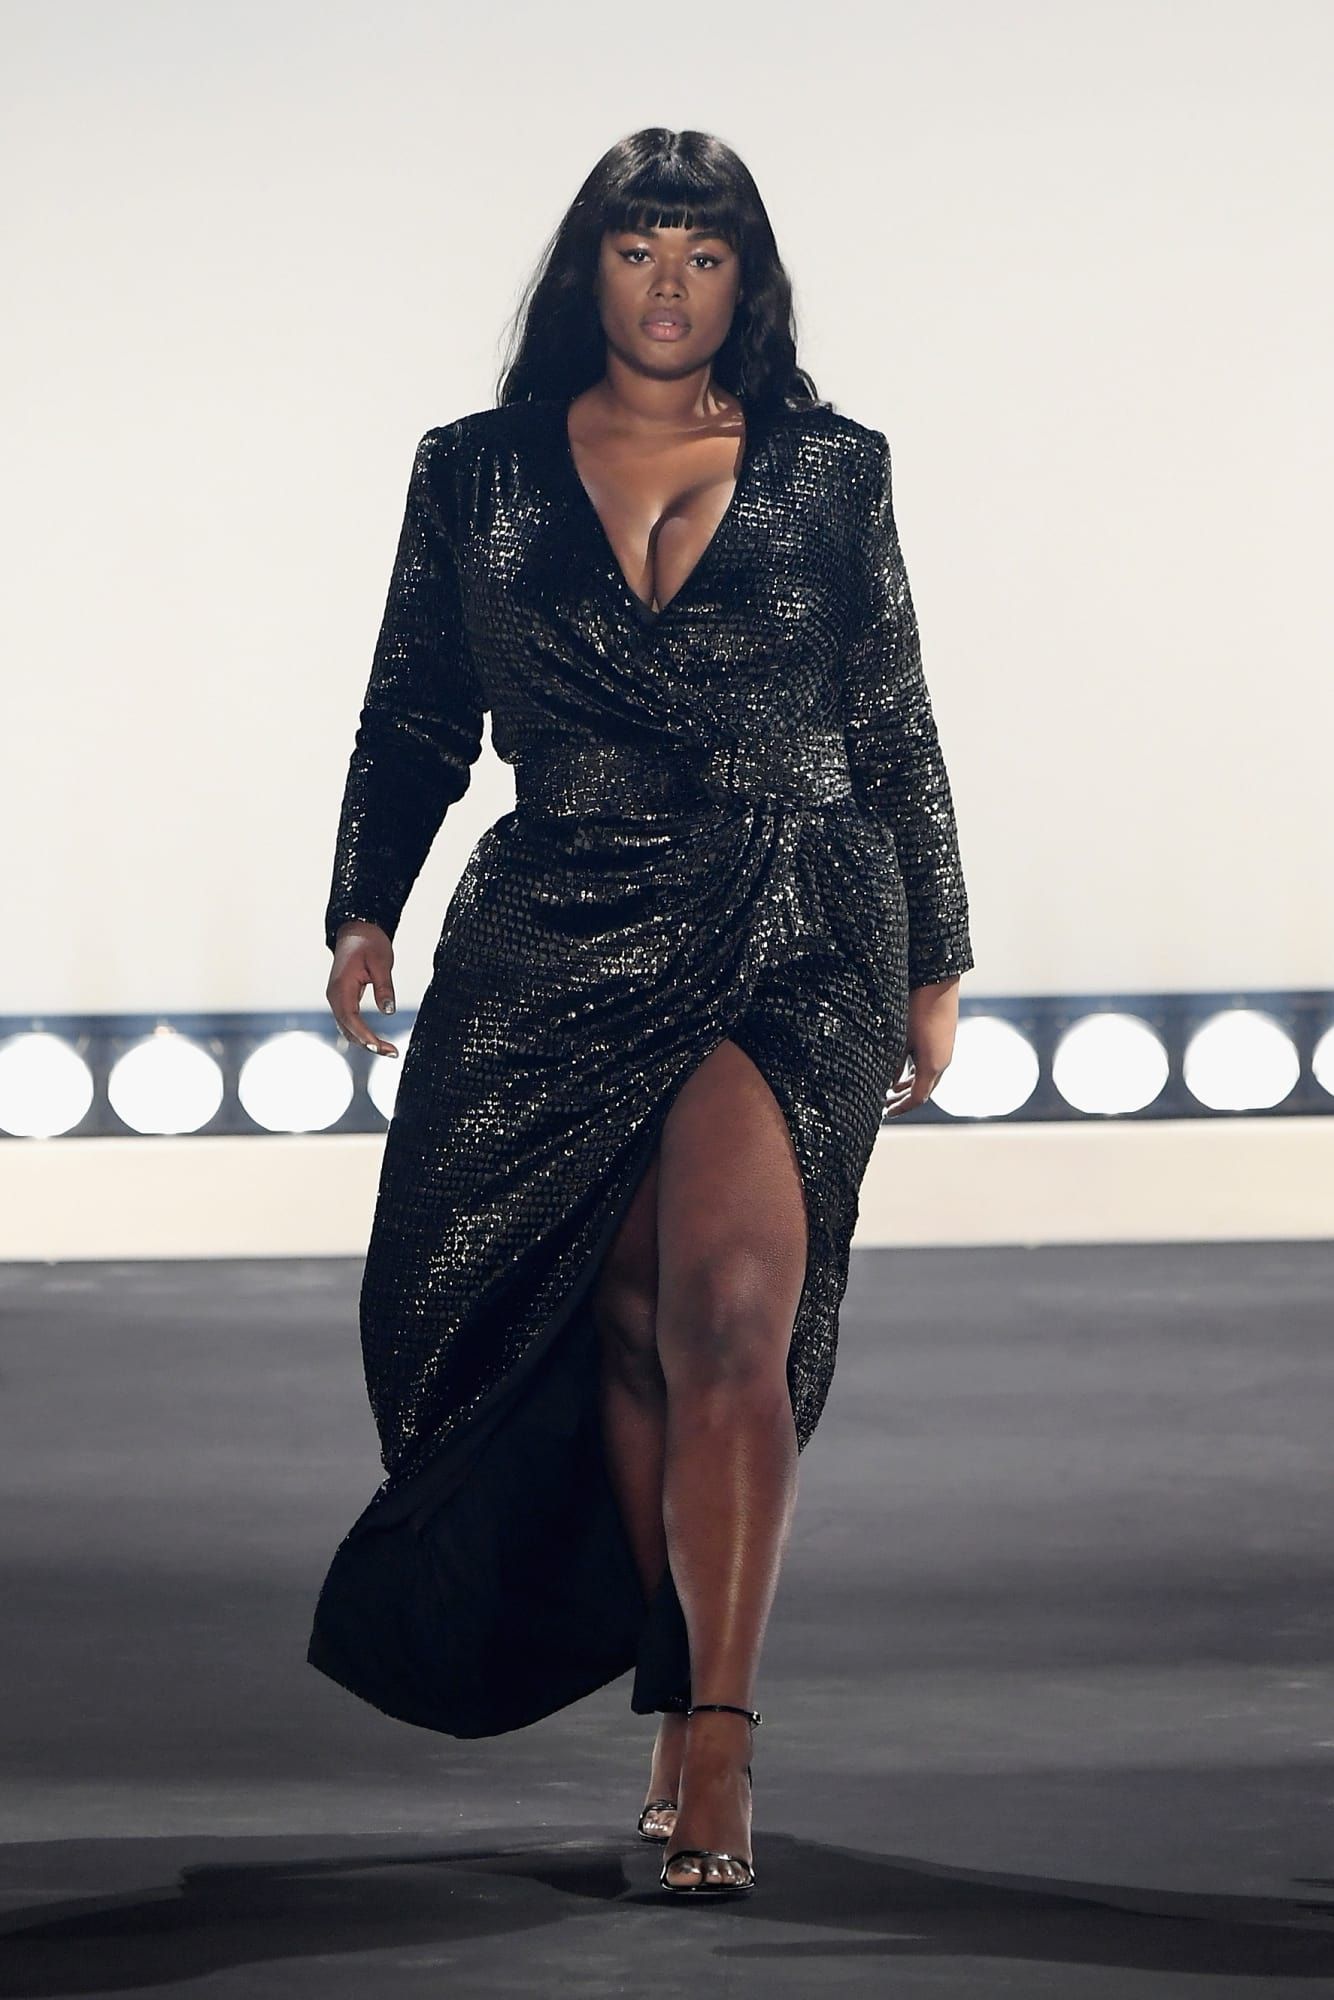 Laverne Cox Closed 11 Honoré's Runway, and It Was Everything a Fashion Show Should Be